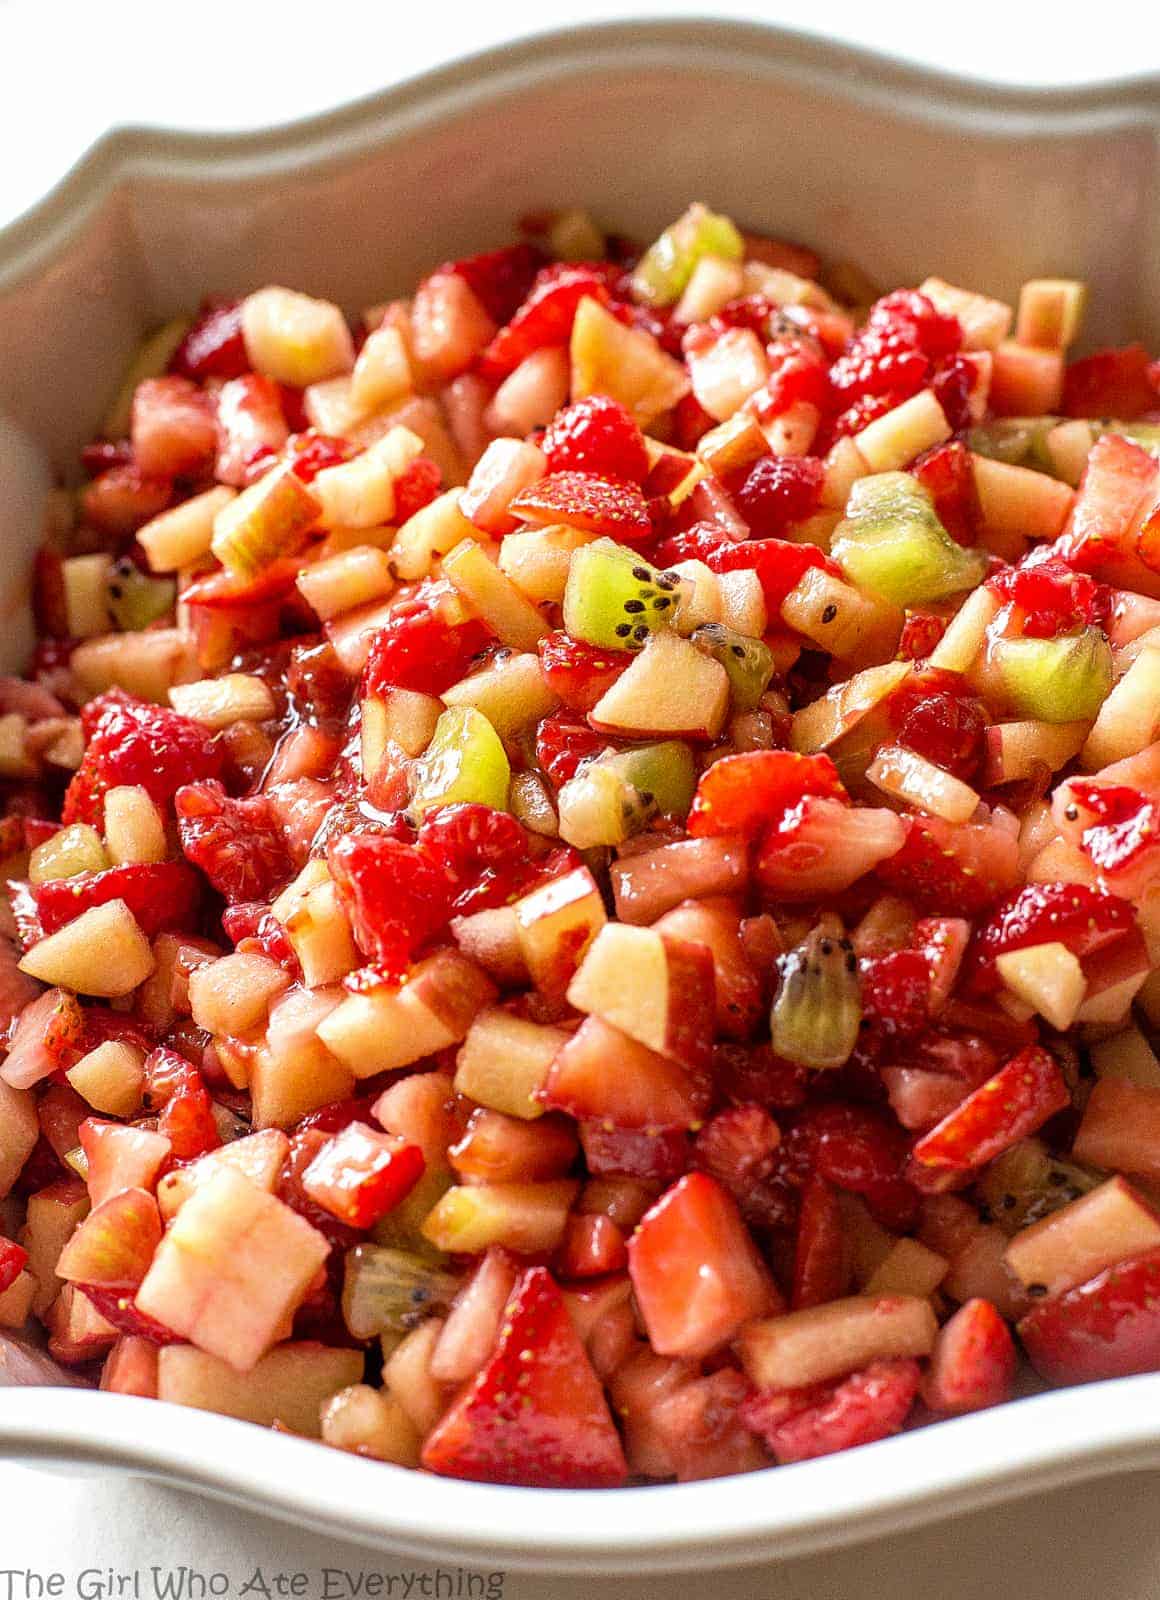 https://www.the-girl-who-ate-everything.com/wp-content/uploads/2010/05/fruit-salsa-with-cinnamon-chips-2.jpg